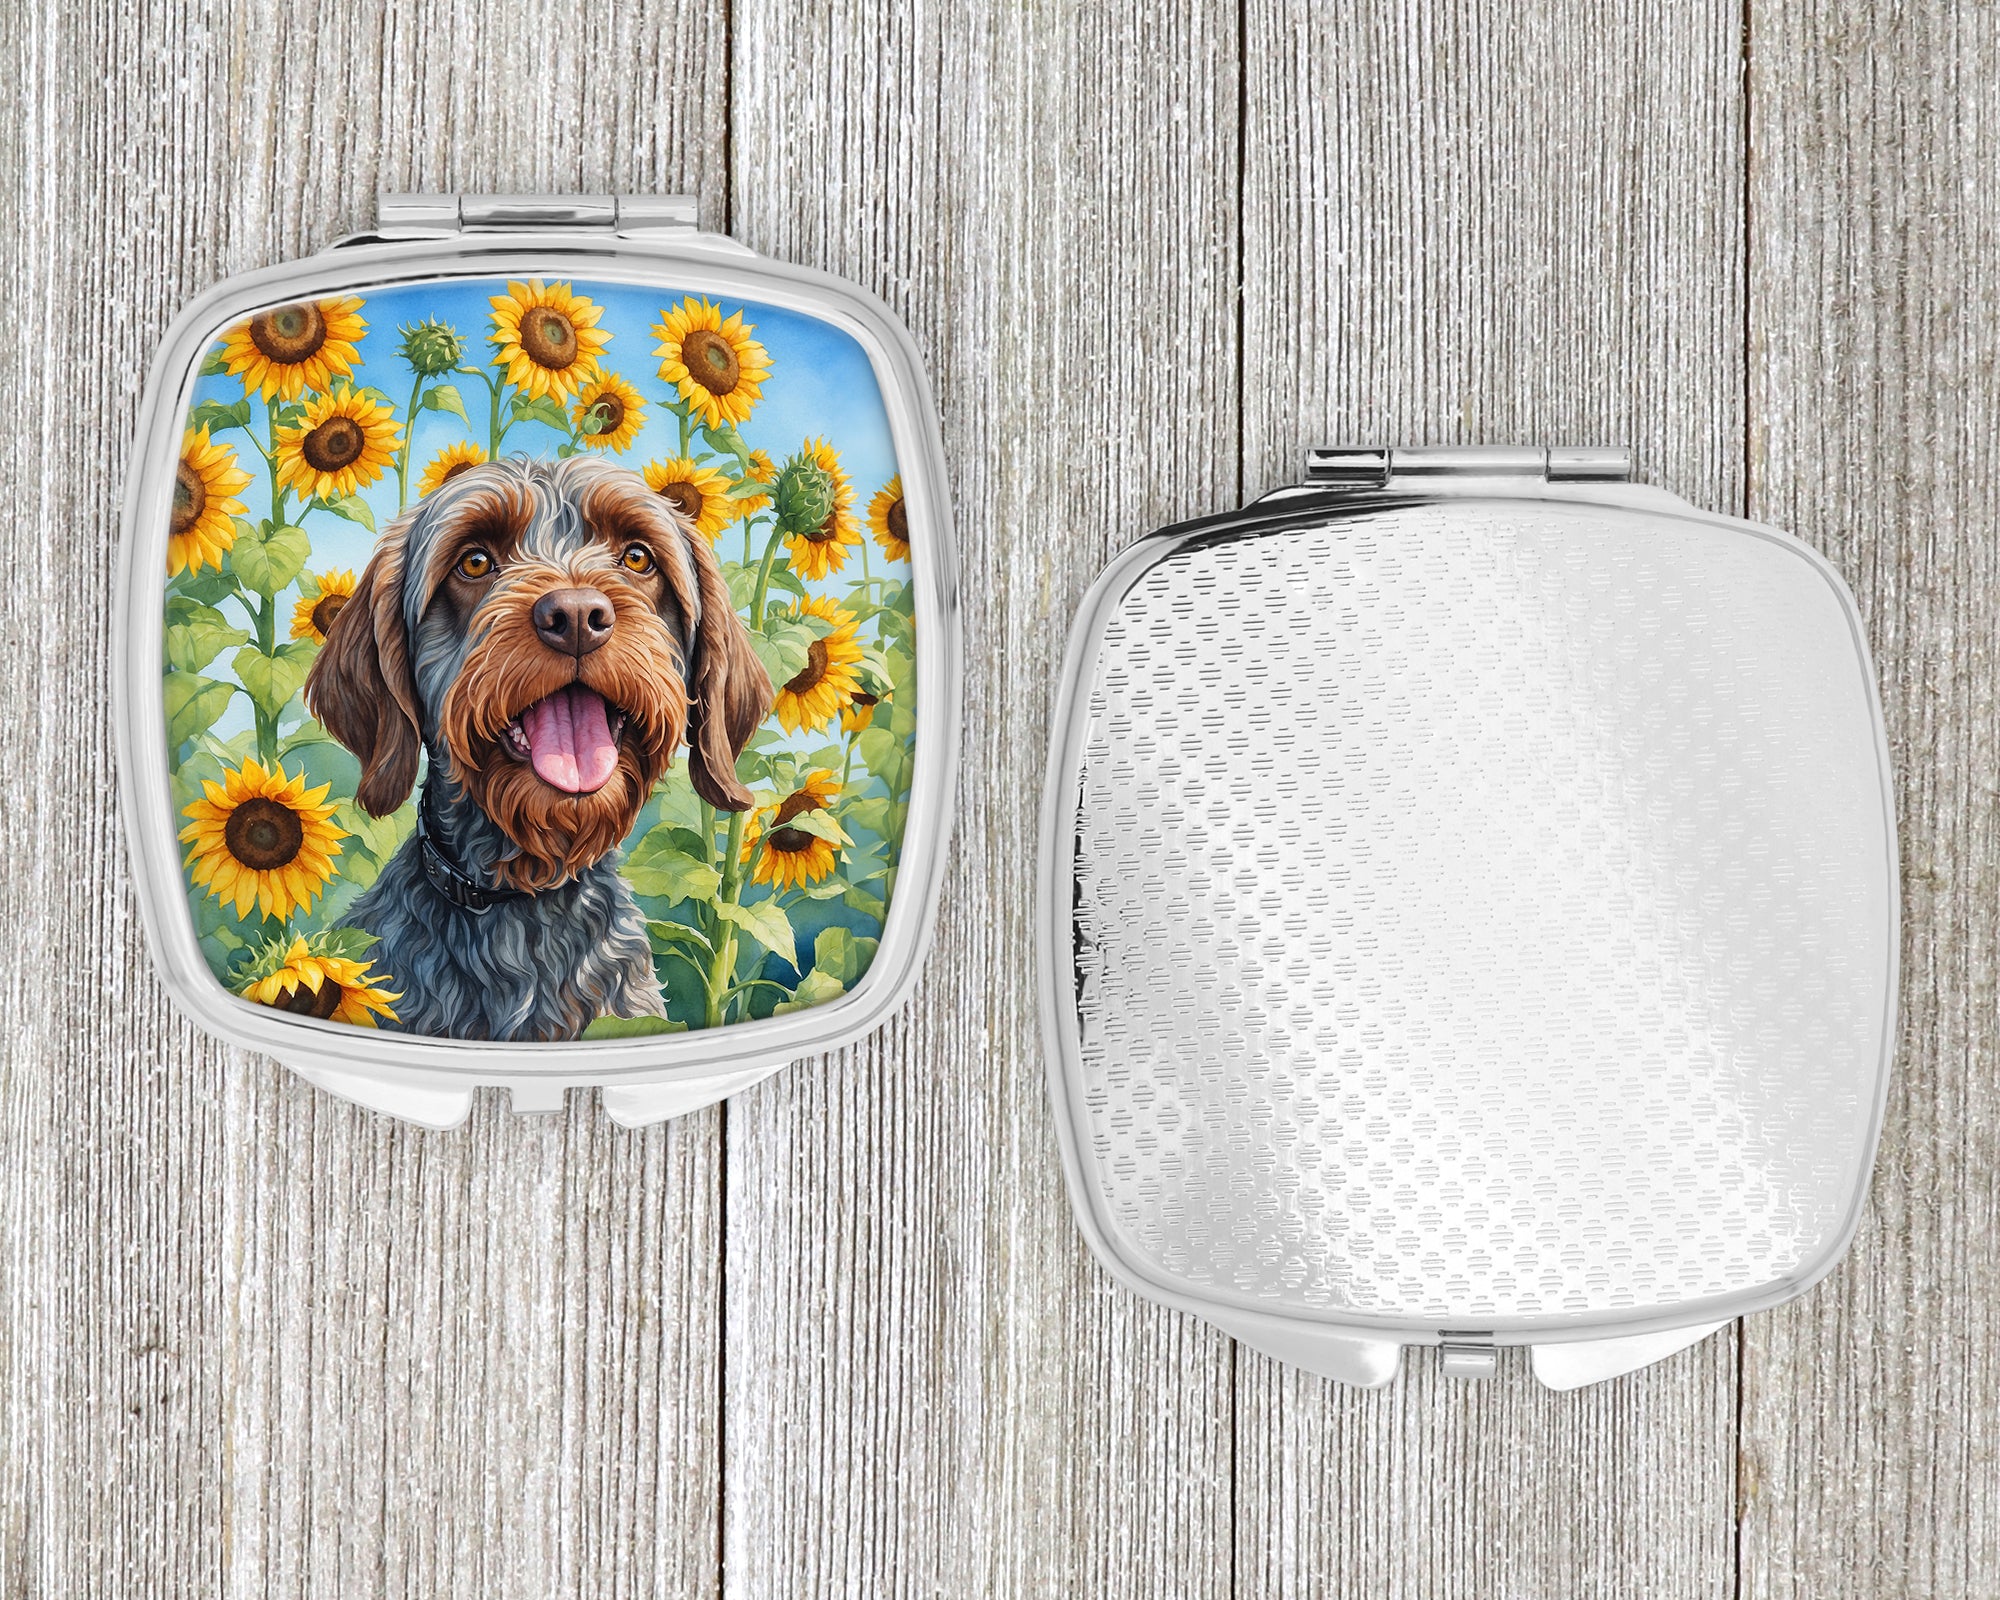 Wirehaired Pointing Griffon in Sunflowers Compact Mirror